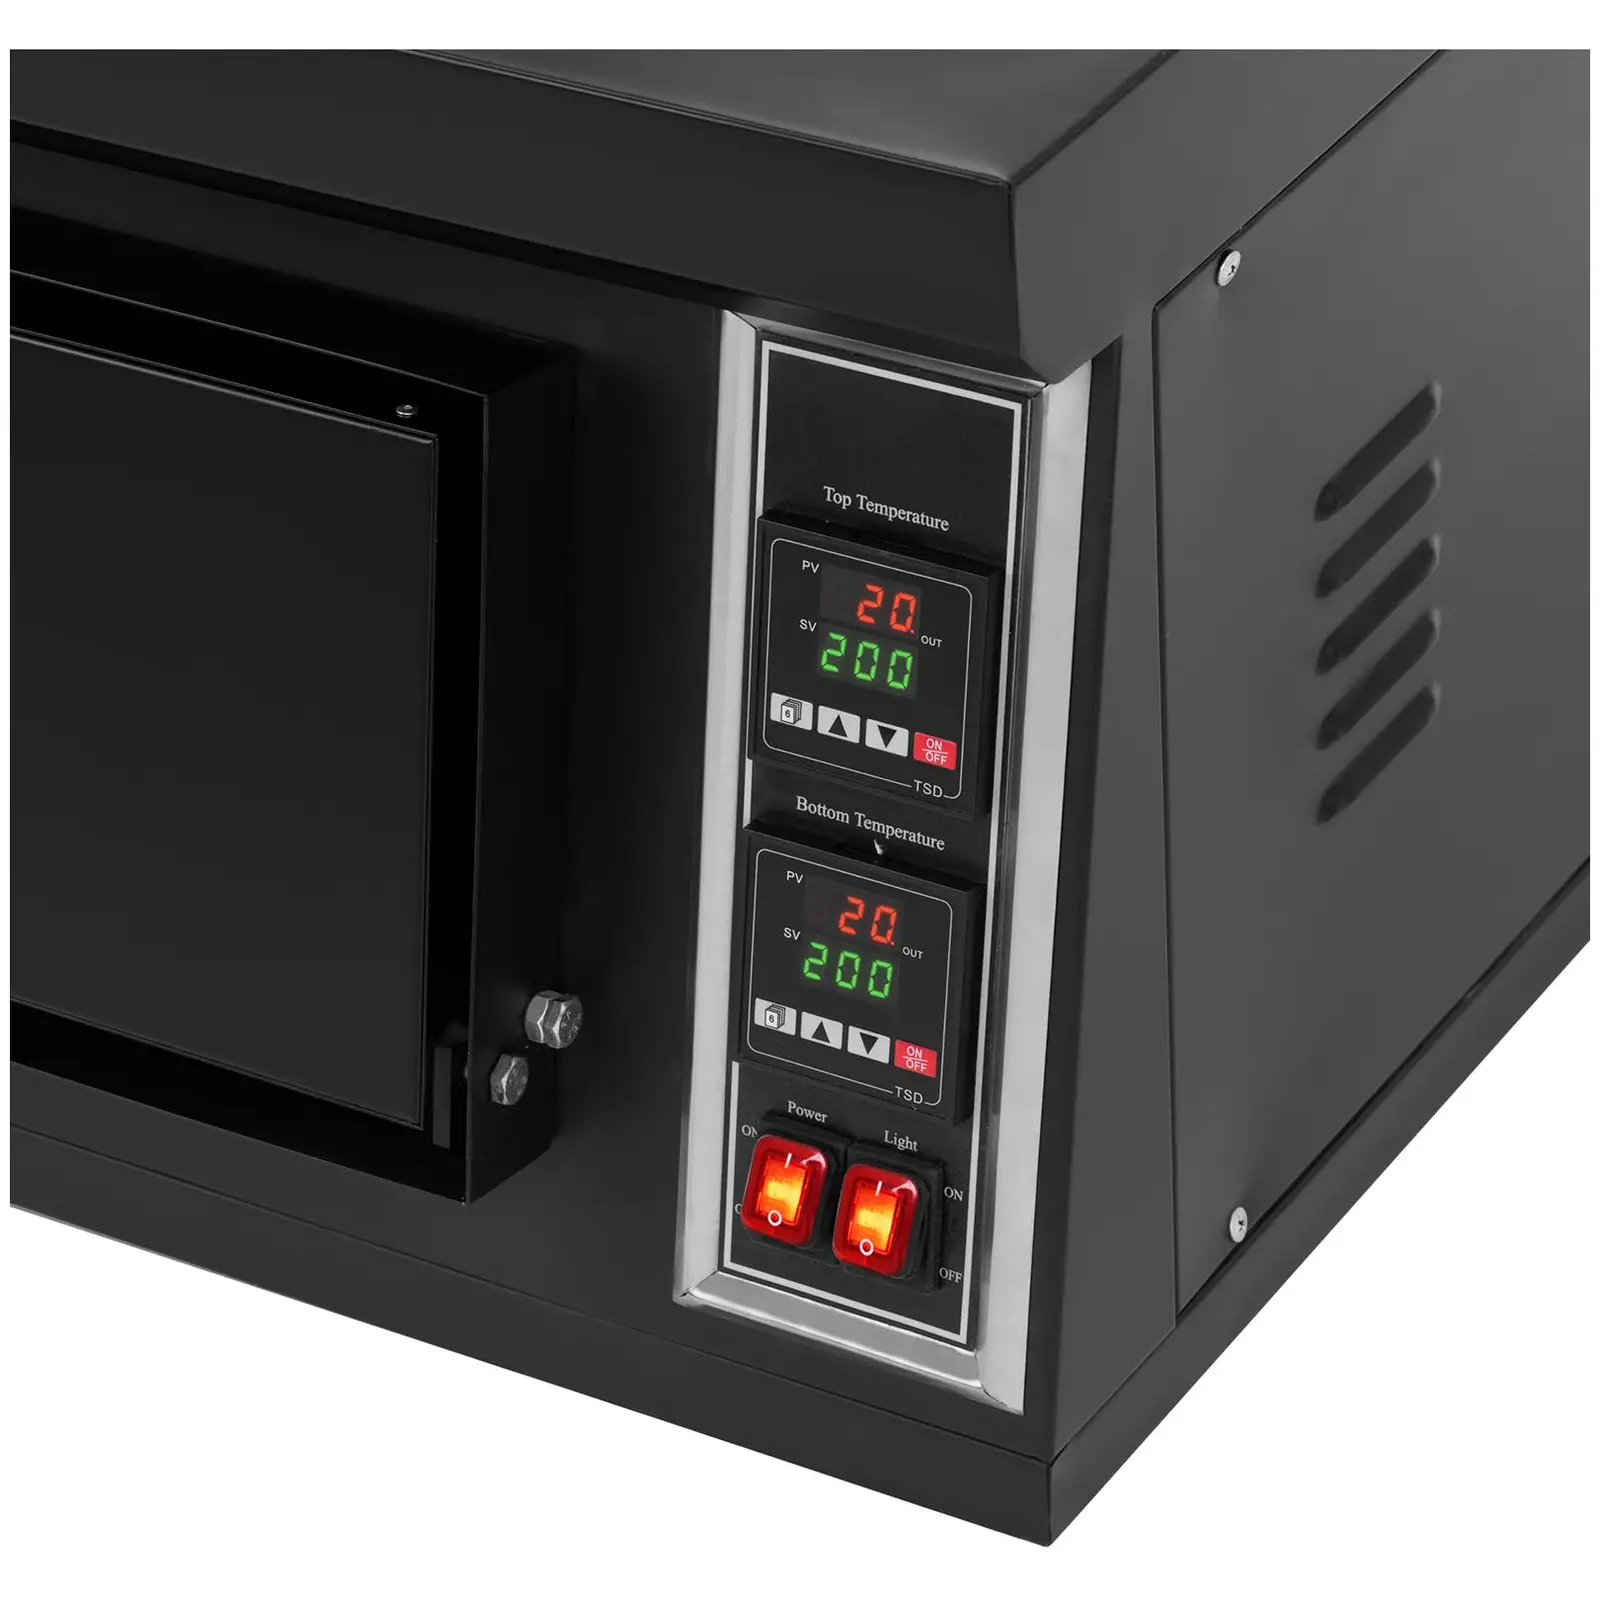 B-Ware Pizzaofen - 1 Kammer - 4200 W - Ø 58 cm - Royal Catering